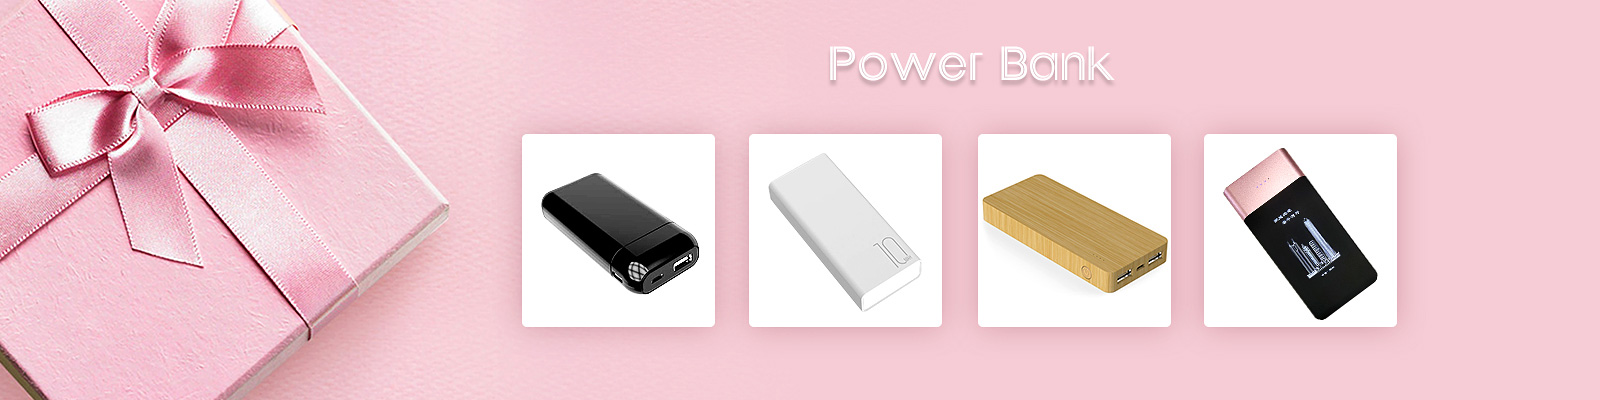 Power bank | Power bank charger | Wireless power bank | leadway group limited